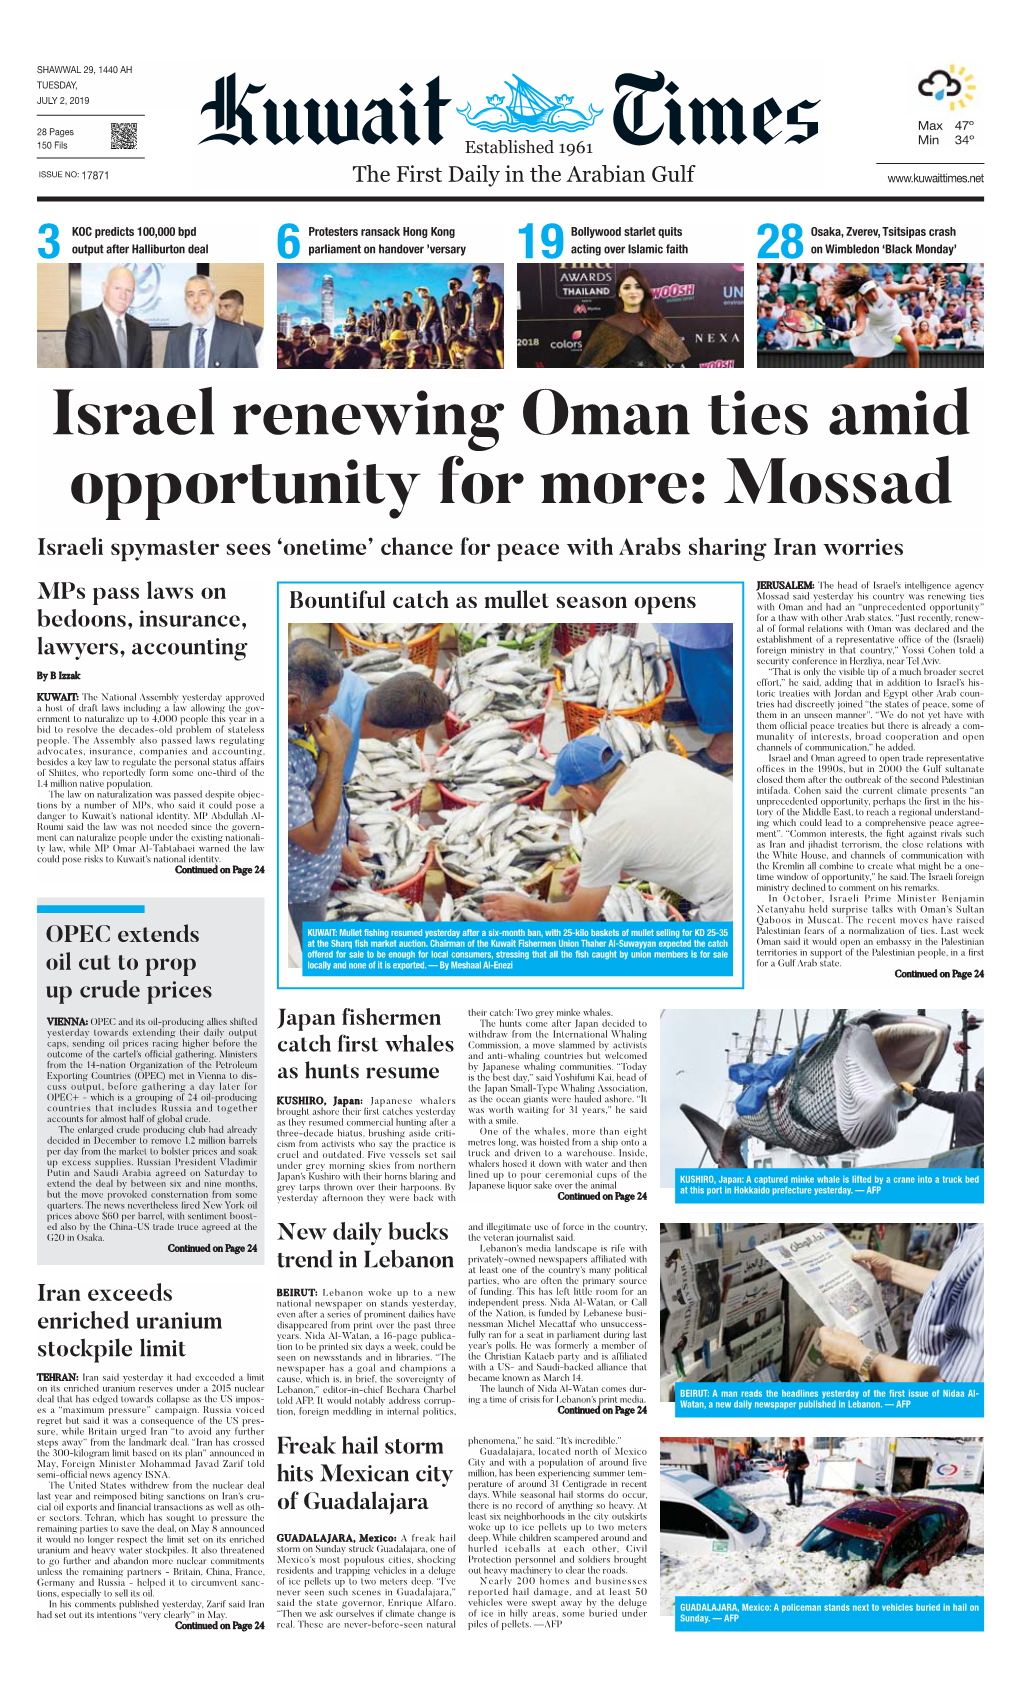 Israel Renewing Oman Ties Amid Opportunity for More: Mossad Israeli Spymaster Sees ‘Onetime’ Chance for Peace with Arabs Sharing Iran Worries